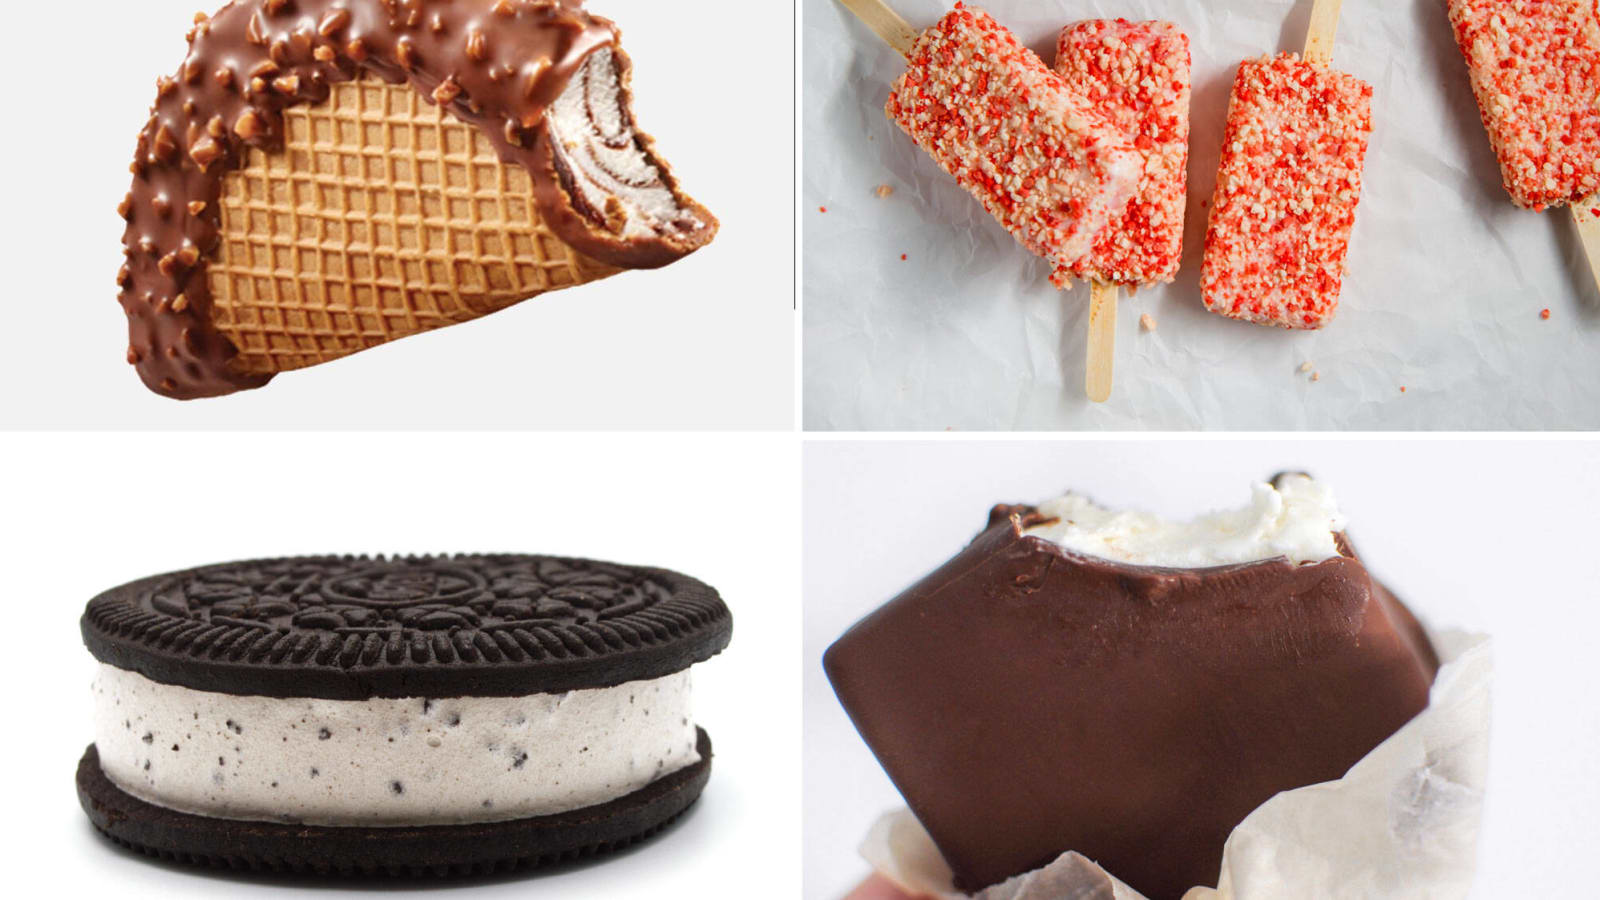 The healthiest and unhealthiest items from the ice cream truck